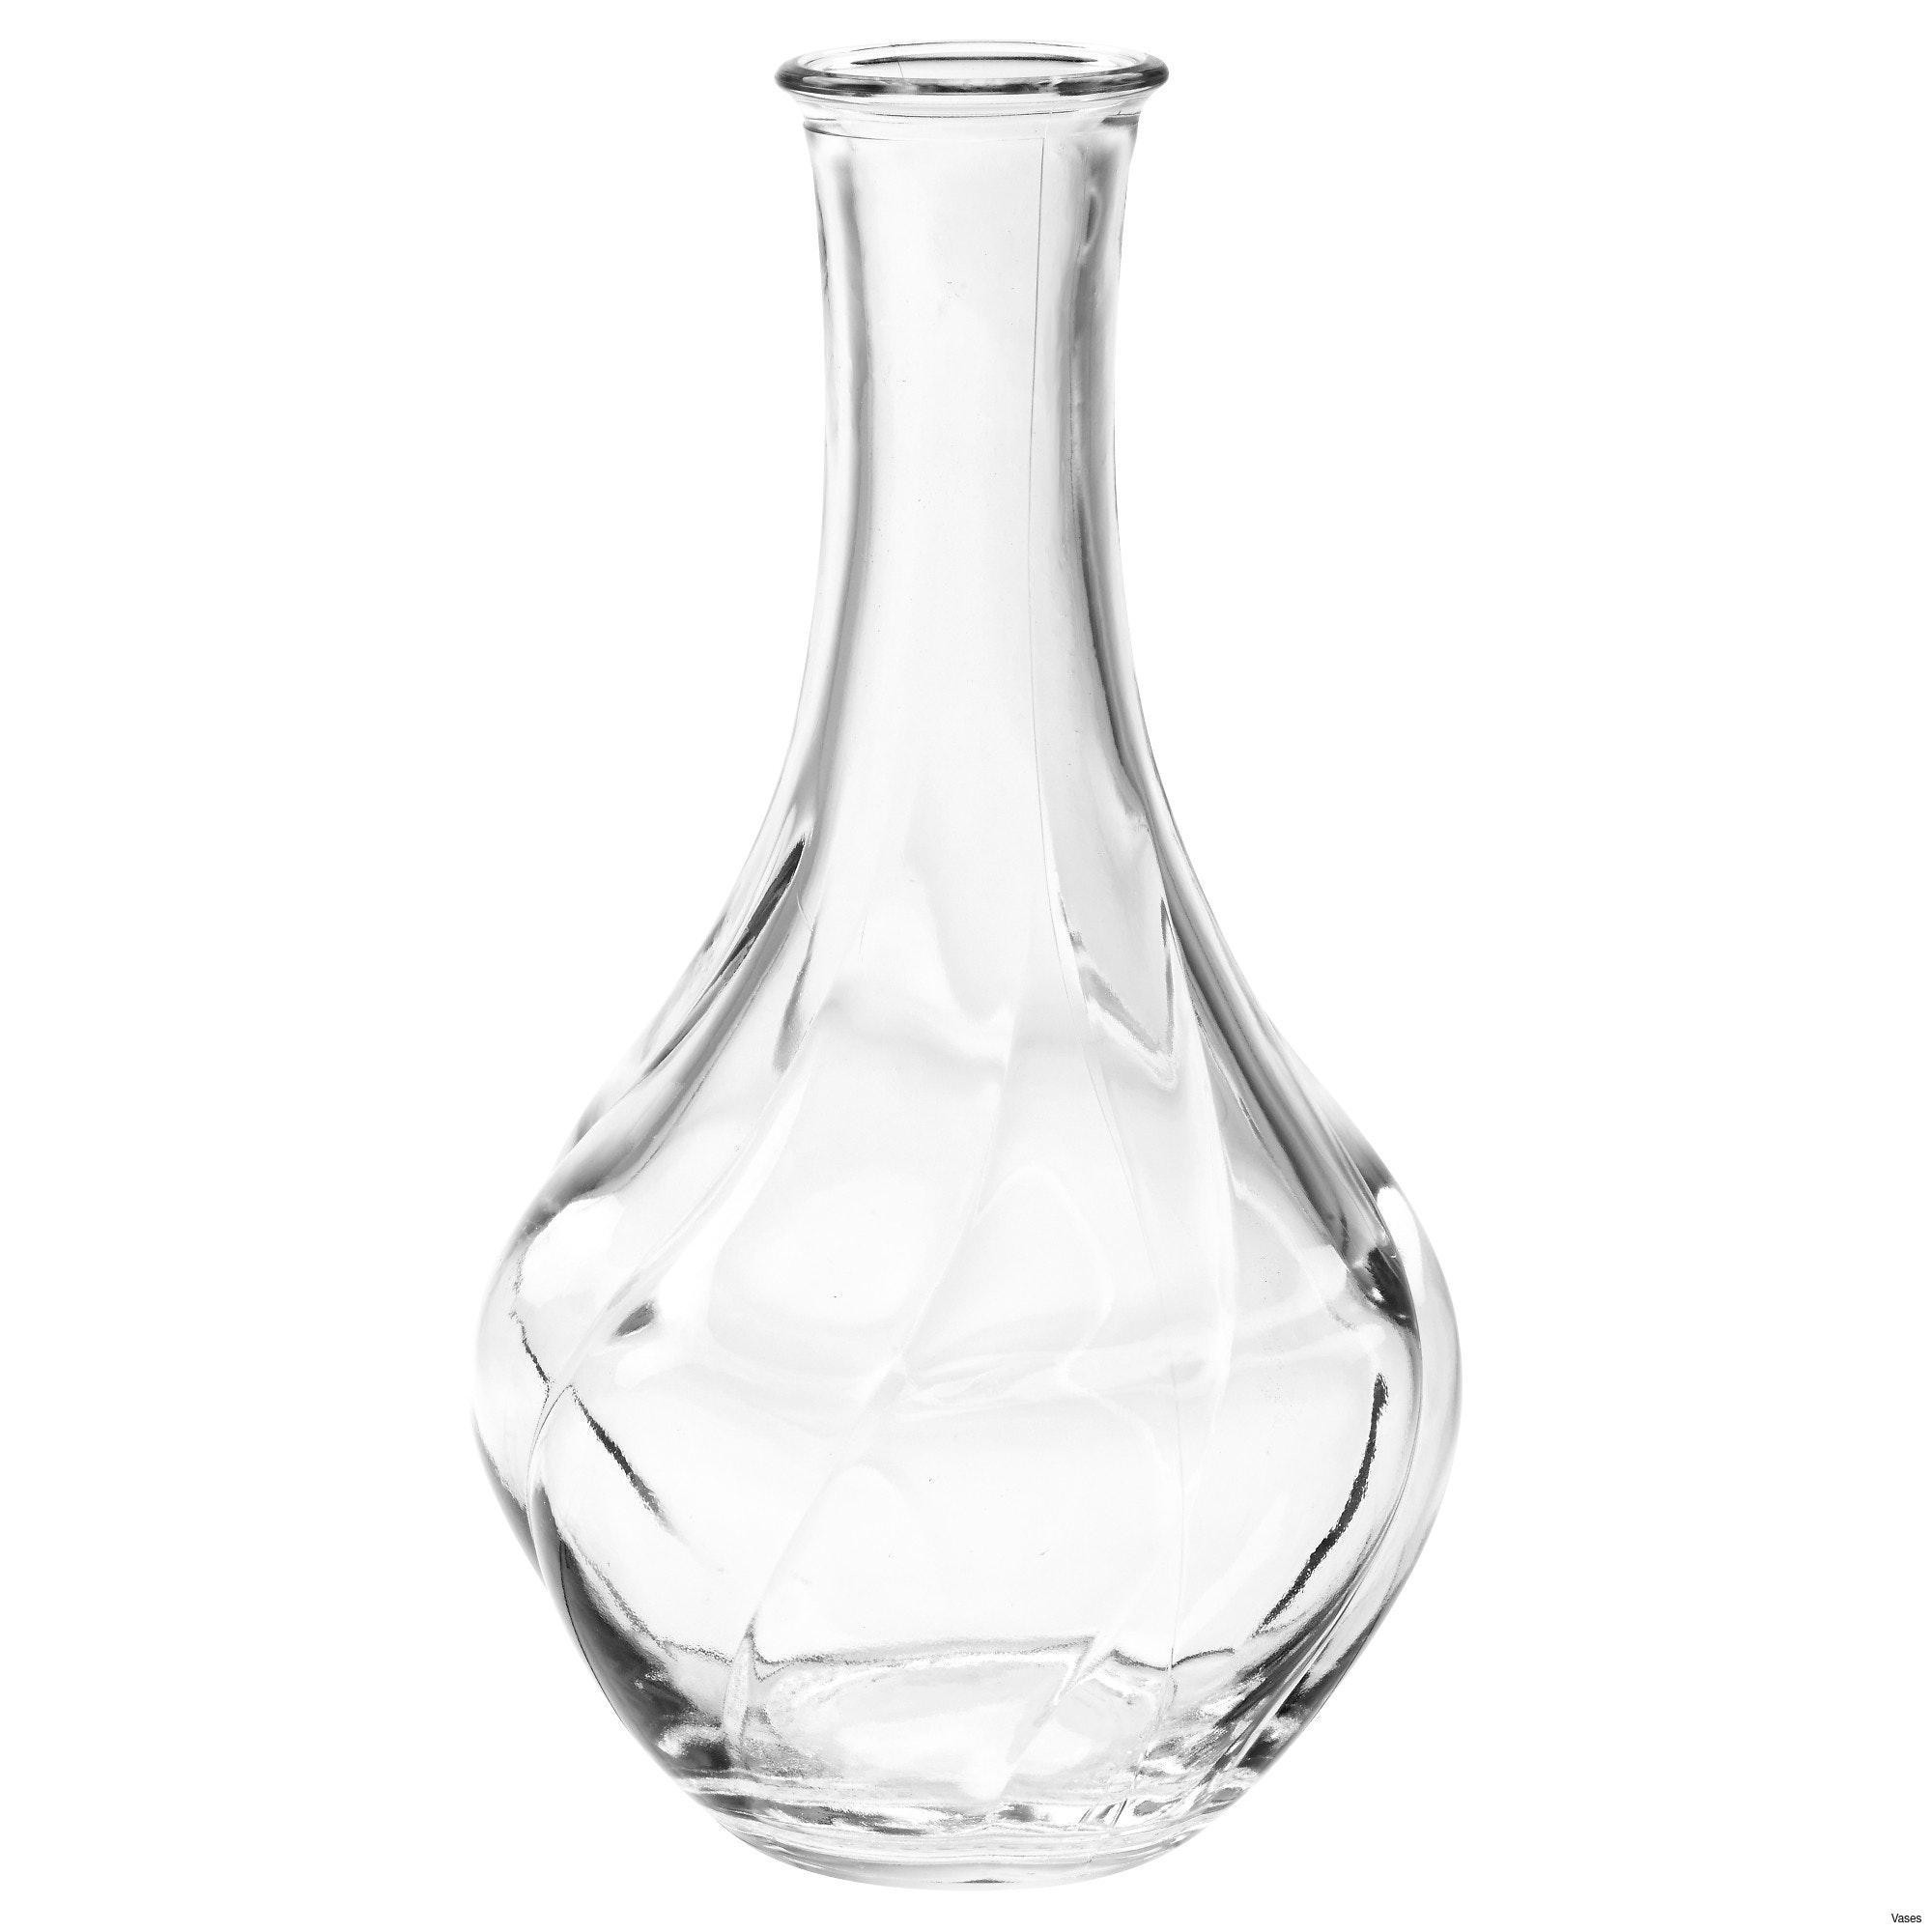 18 Cute Cheap Clear Vases 2024 free download cheap clear vases of large glass vase gallery living room glass vases fresh clear vase 0d intended for large glass vase gallery living room glass vases fresh clear vase 0d tags amazing and o